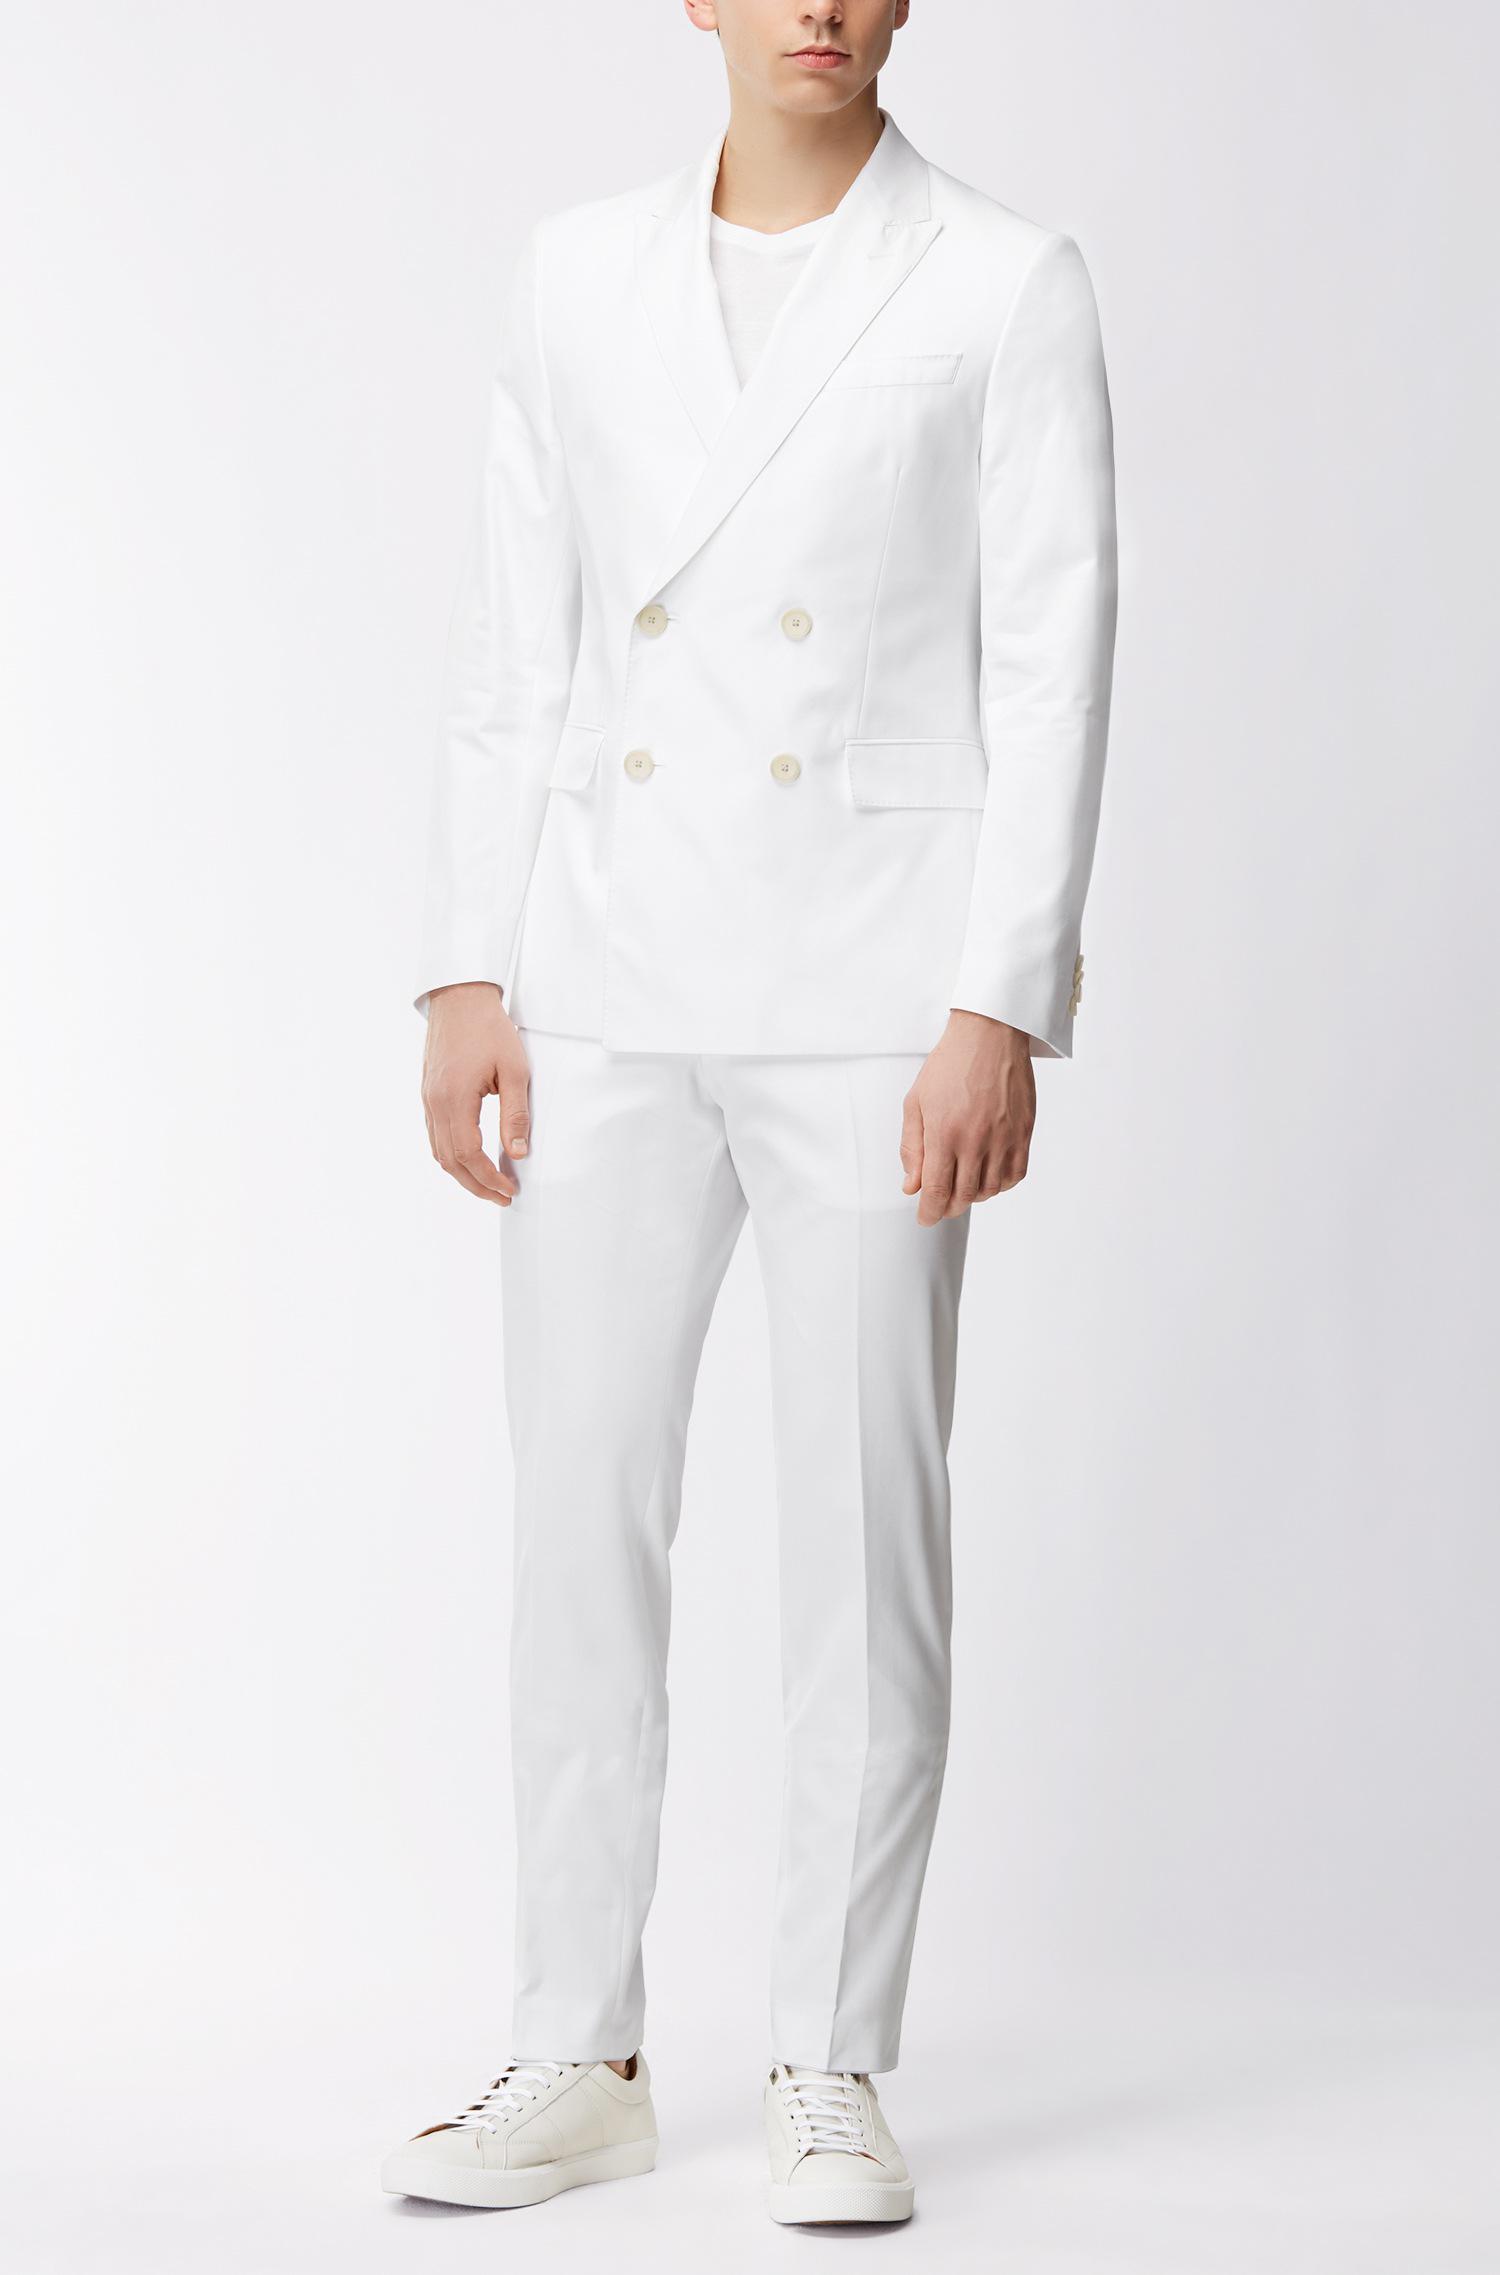 HUGO BOSS Slim-fit Double-breasted Suit 